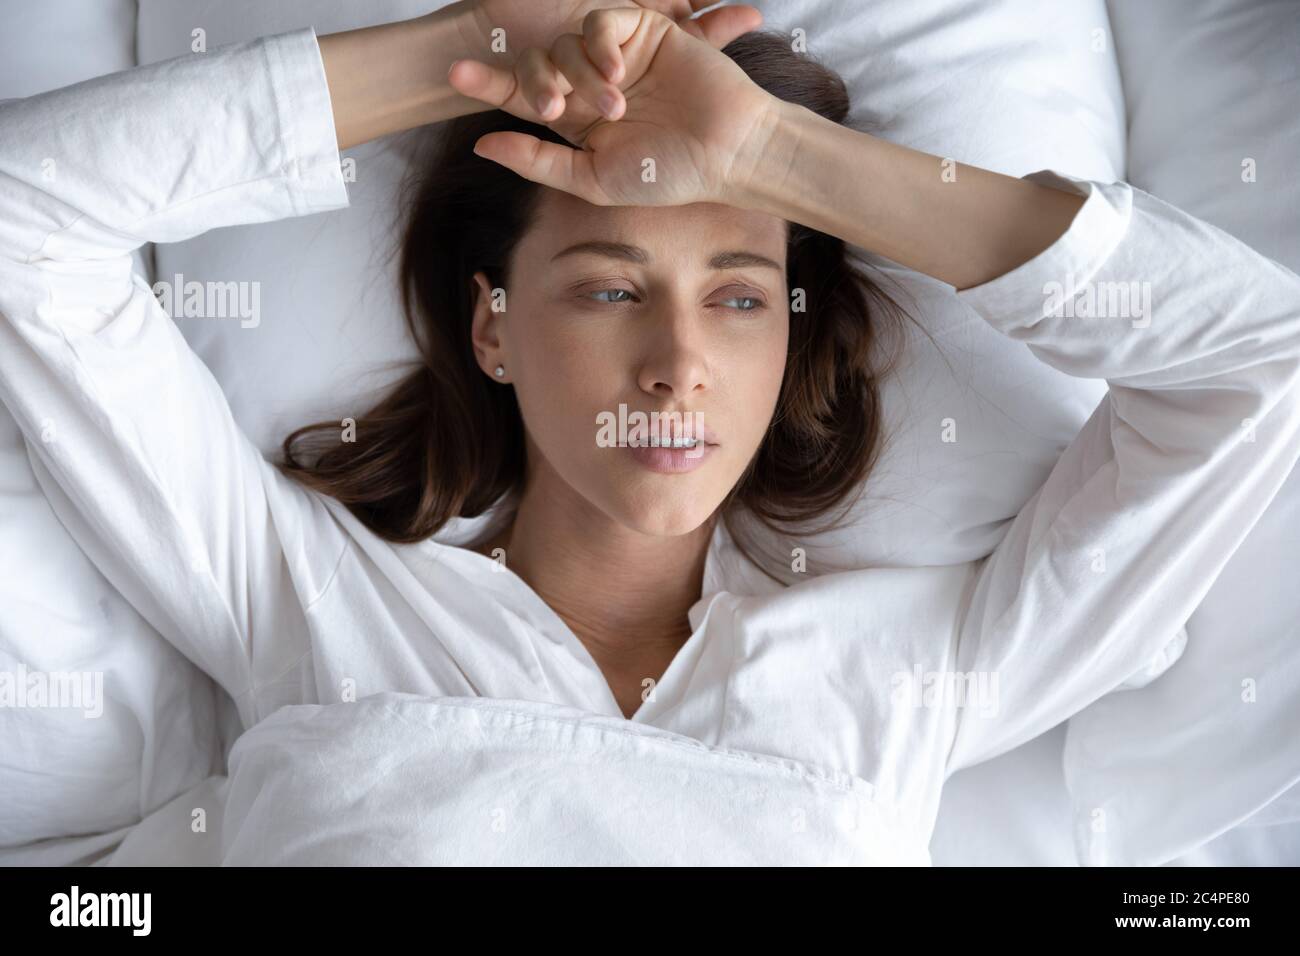 Depressed woman lying in bed feeling down or upset Stock Photo